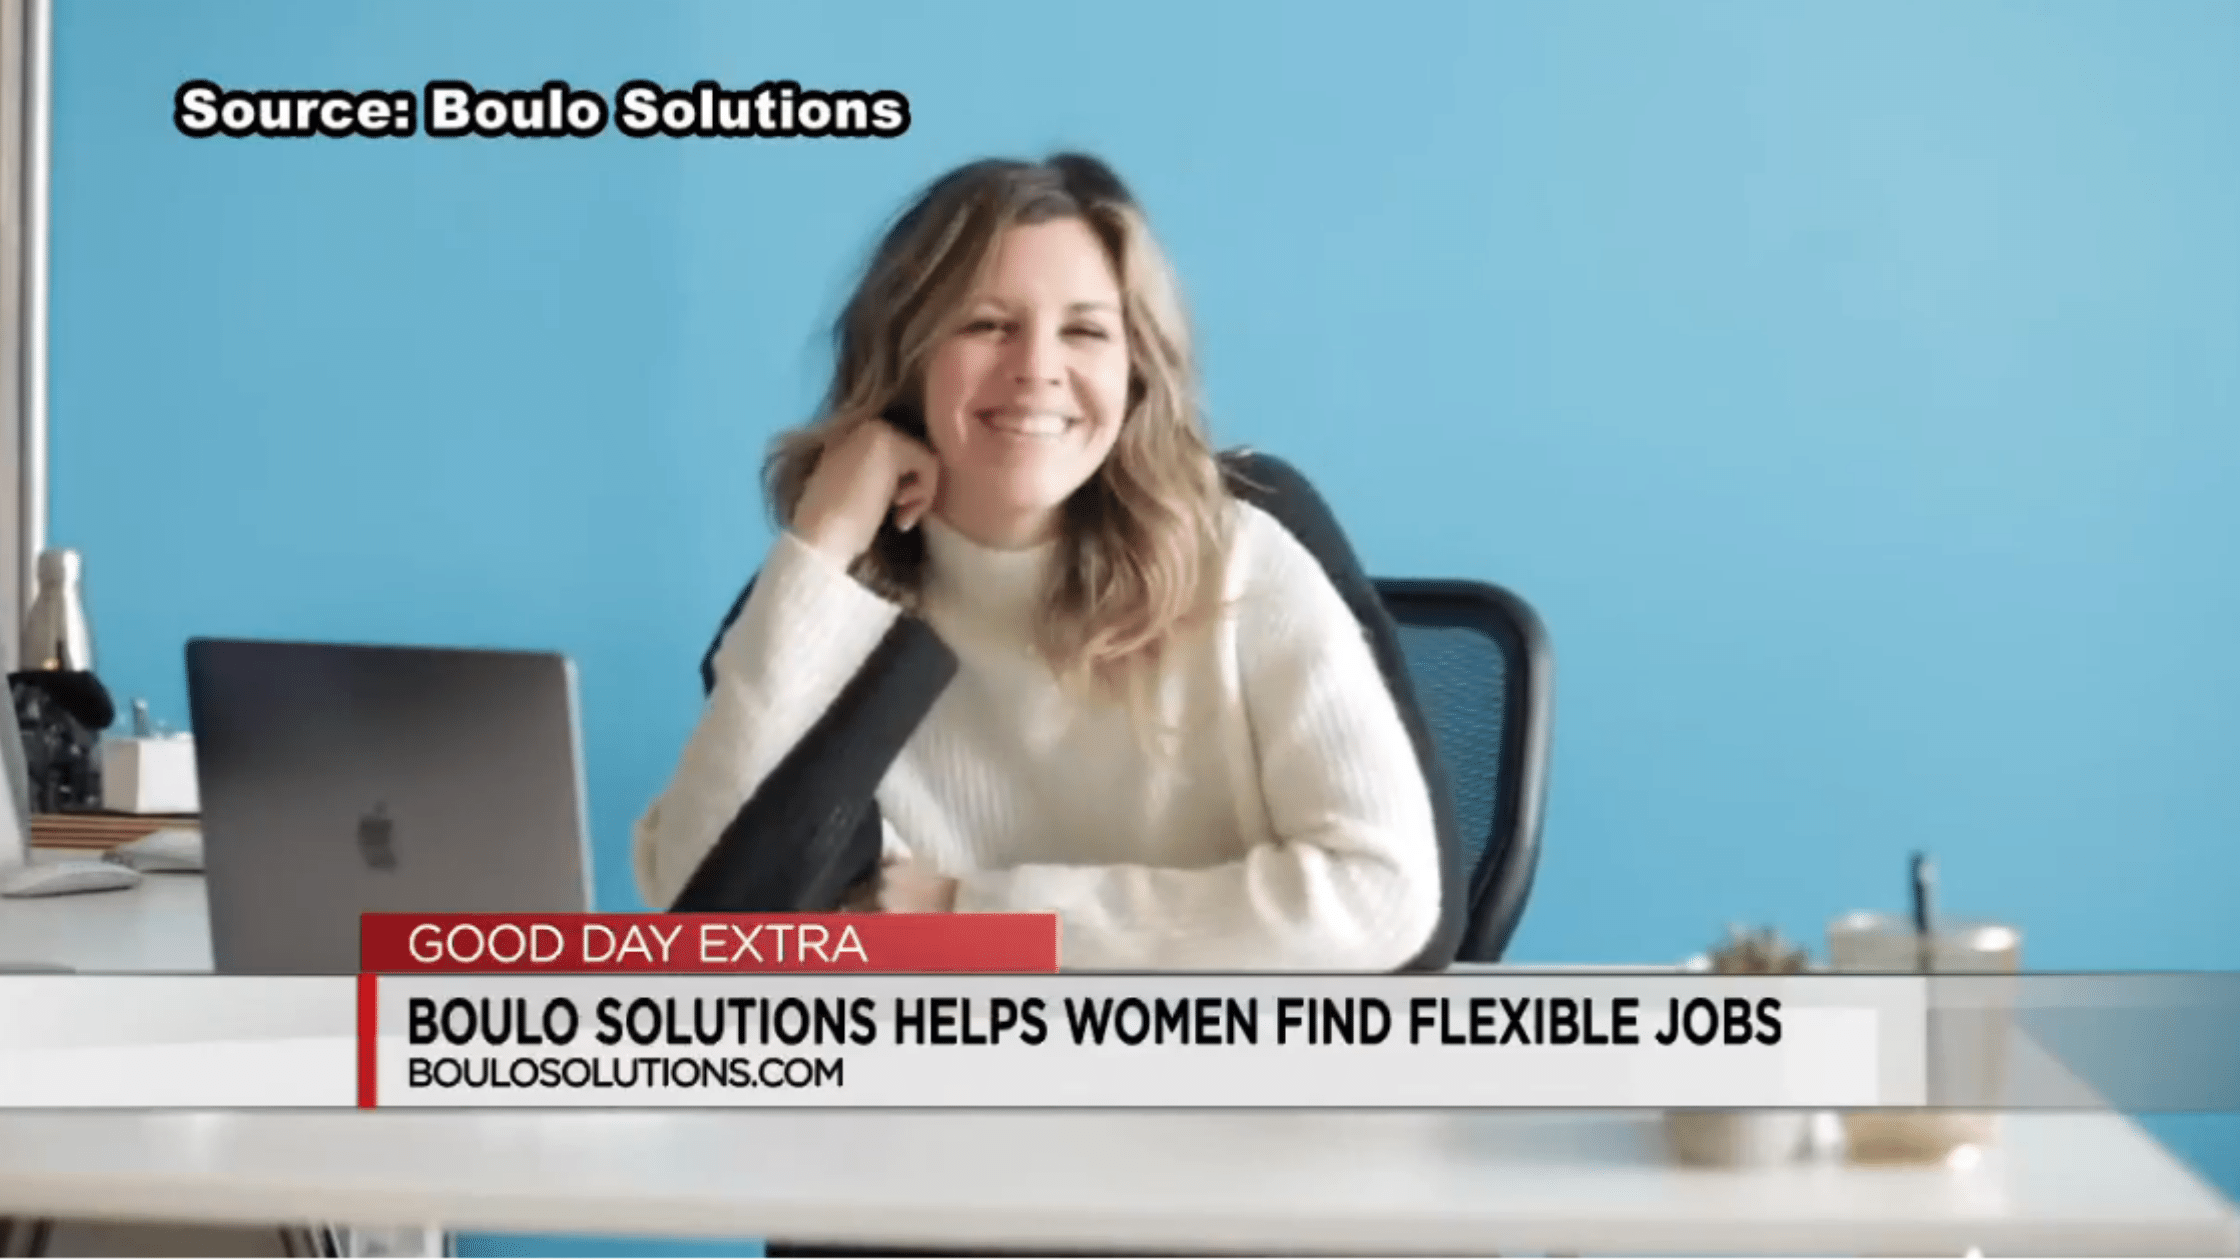 Woman working at computer at night forClare Huddleston's WBRC Fox 6 story Boulo Solutions helps women find flexible jobs